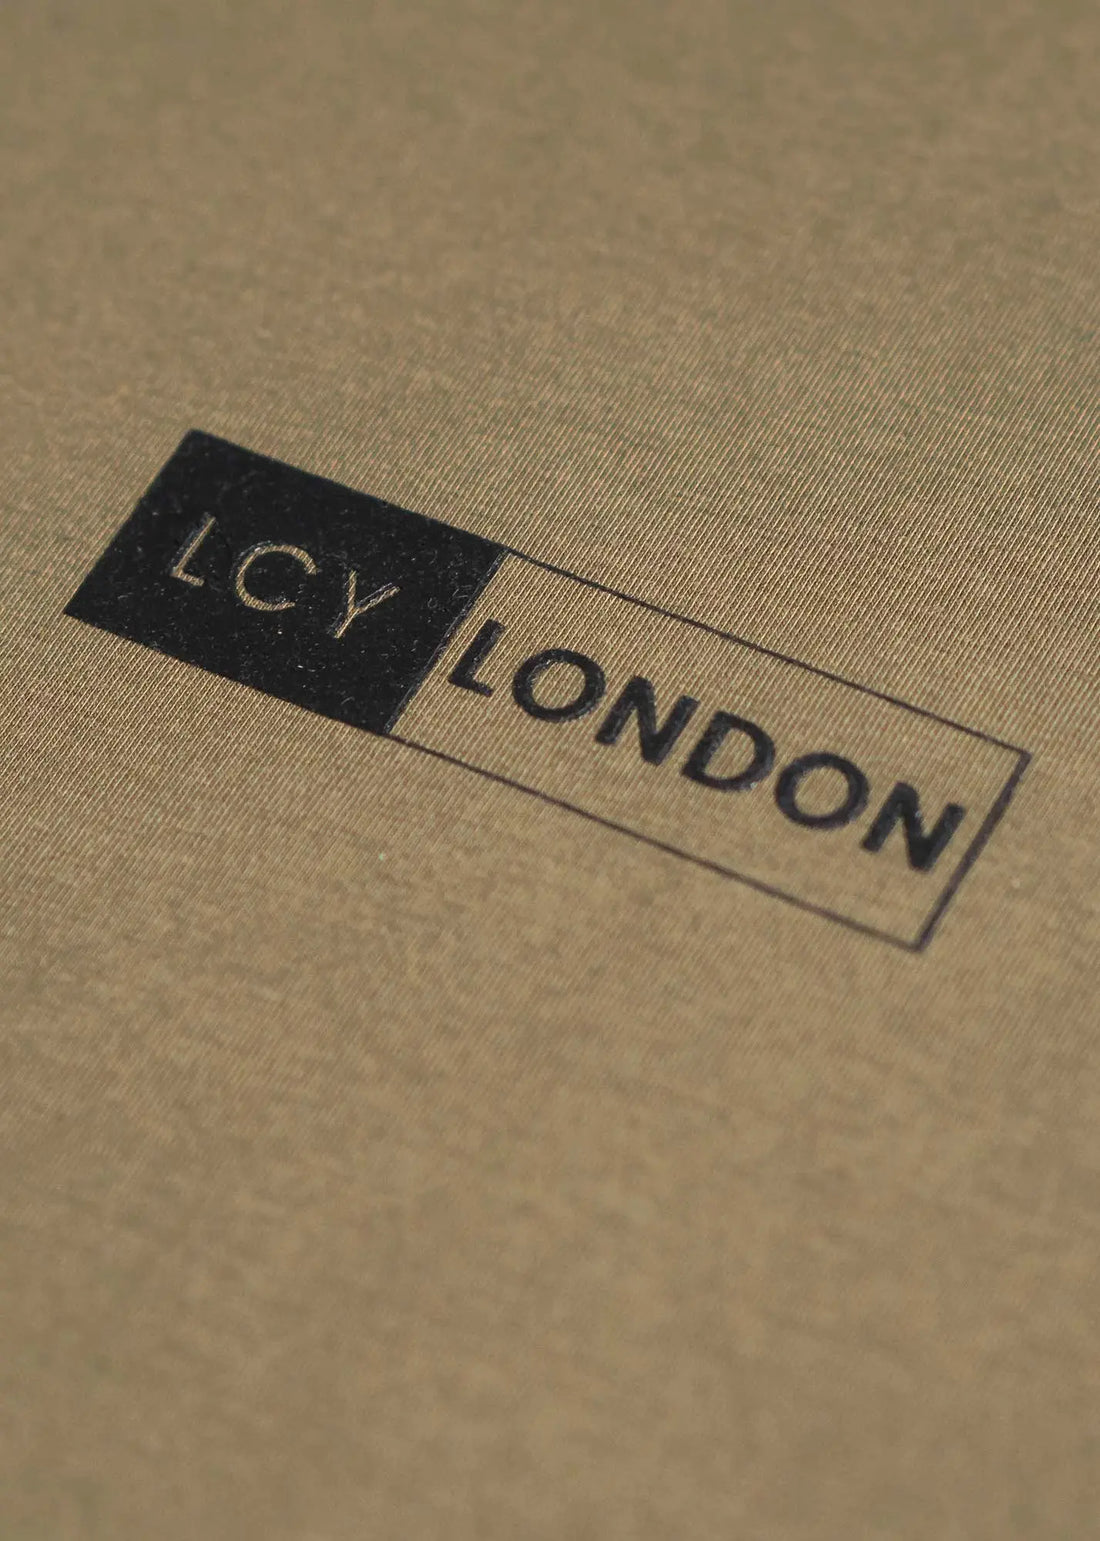 LCY Basic Cropped Tee with Contrast Tape LCY London